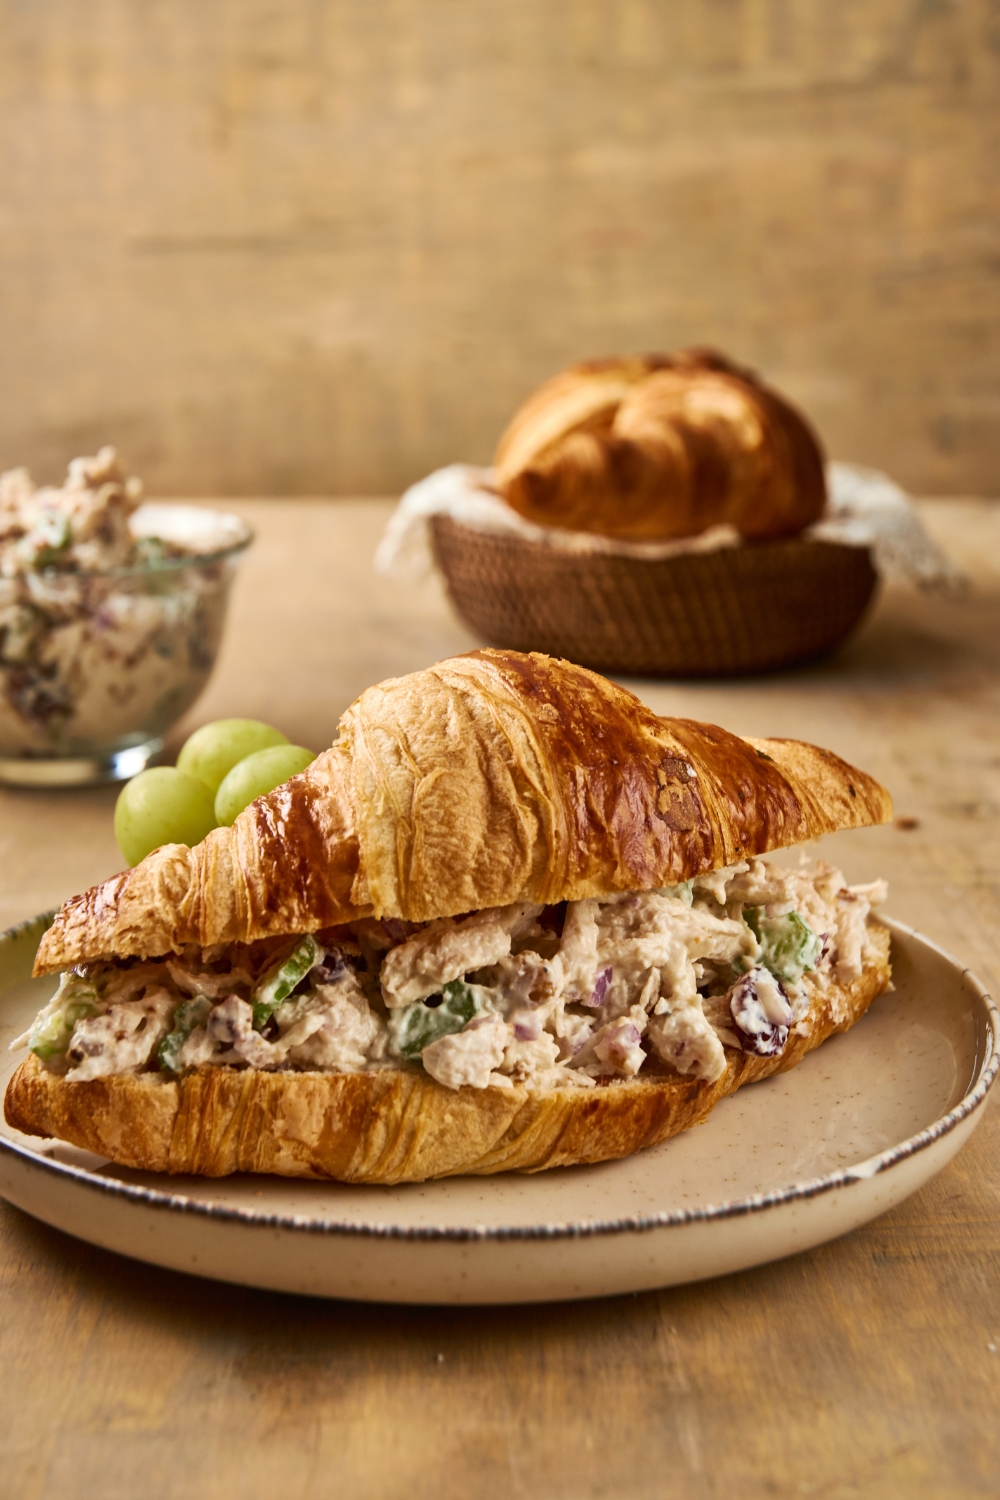 A chicken salad croissant sits on a gray plate. A few grapes are visible on the plate as well.